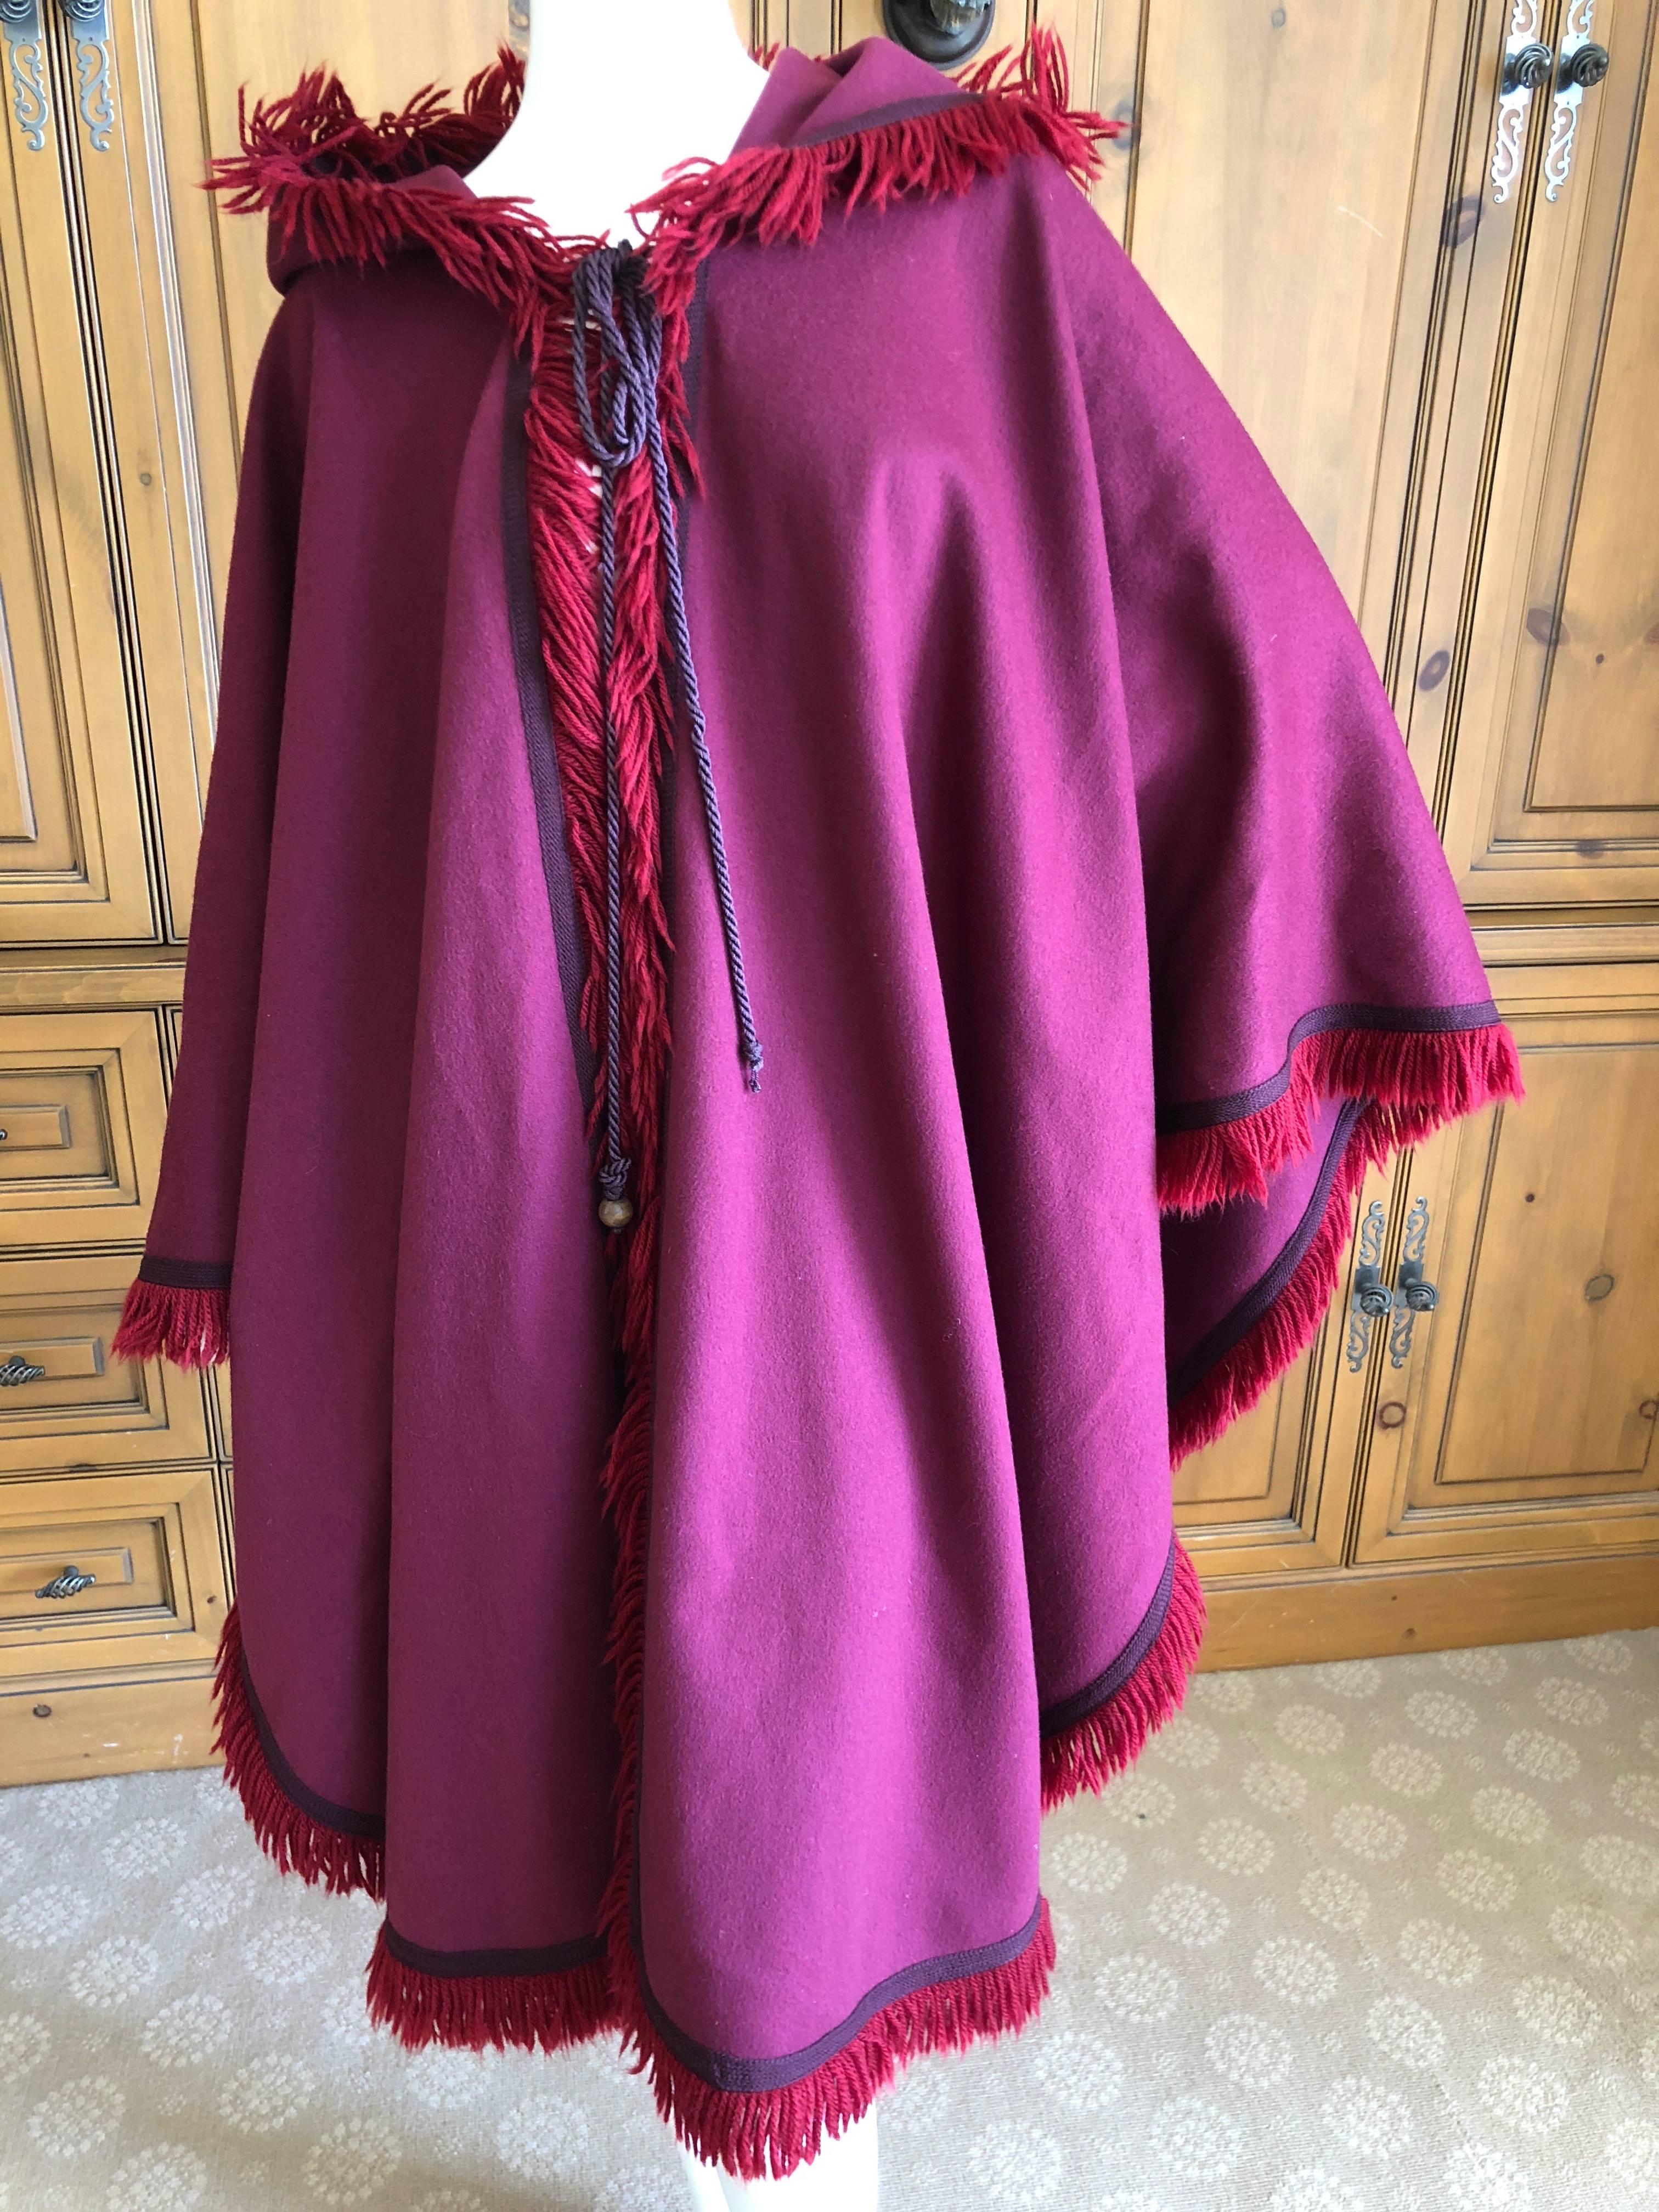 Yves Saint Laurent Rive Gauche Fringed Fuchsia Cape with Hood and Tassel In Excellent Condition For Sale In Cloverdale, CA